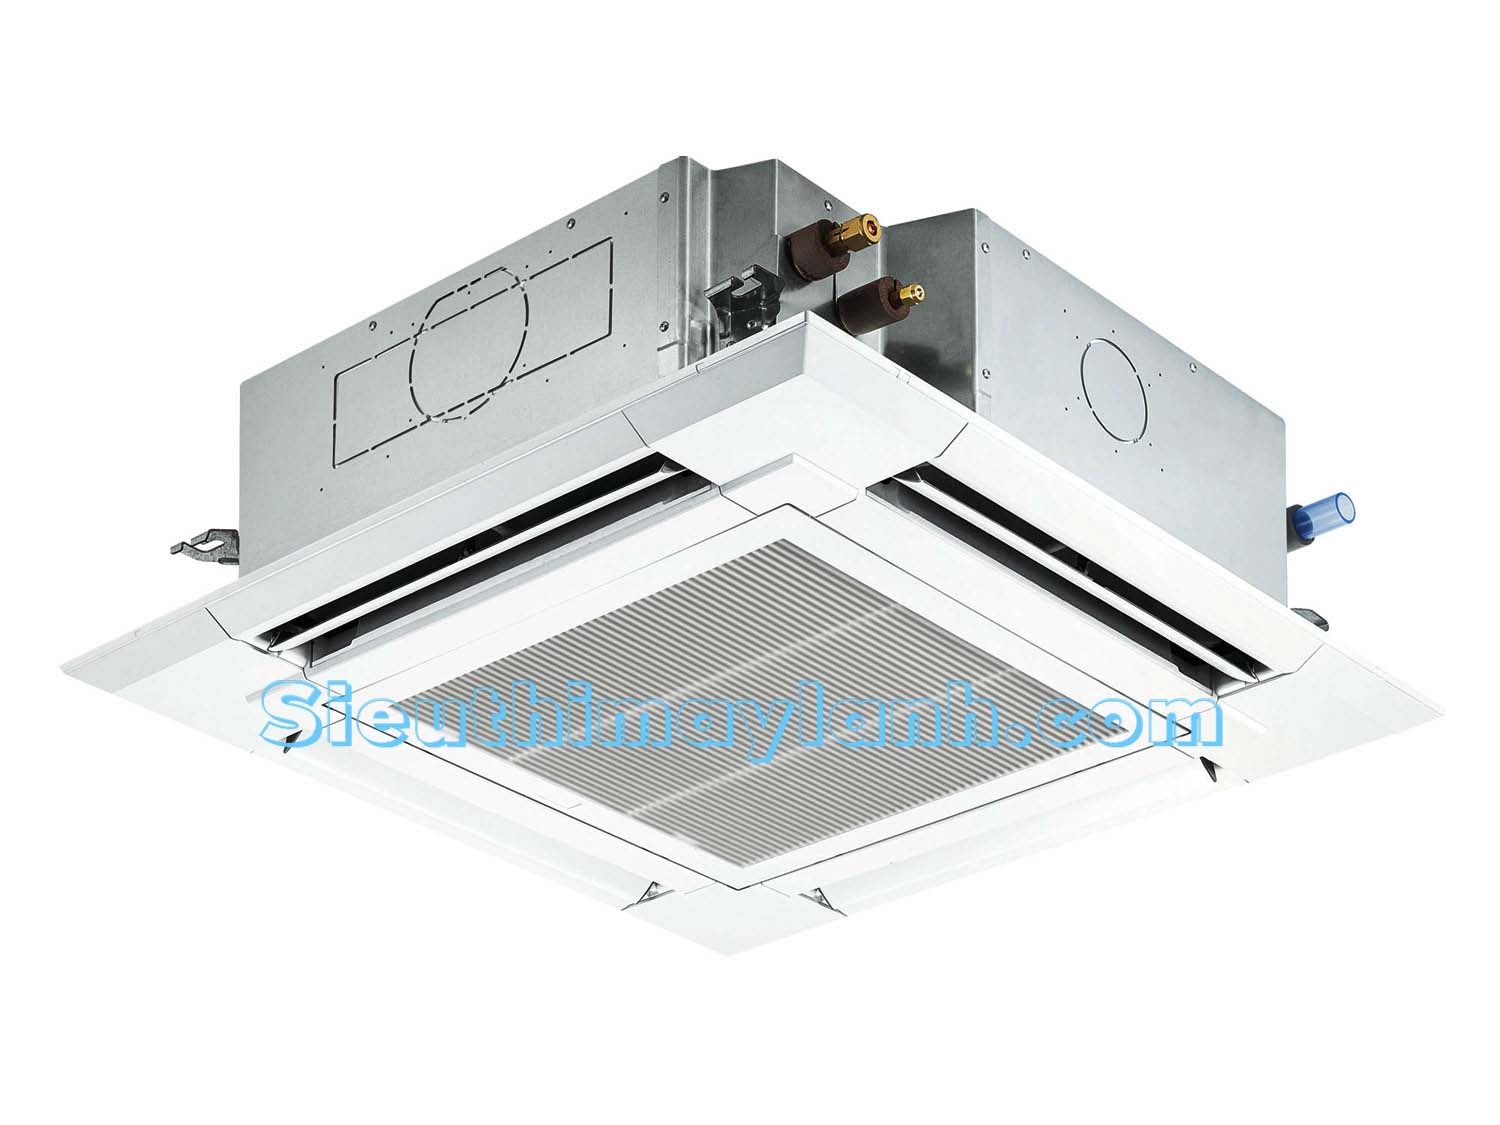 Mitsubishi Electric Ceiling mounted air conditioning PLY-P48BALCM Inverter (6.0Hp) - 3 Phases